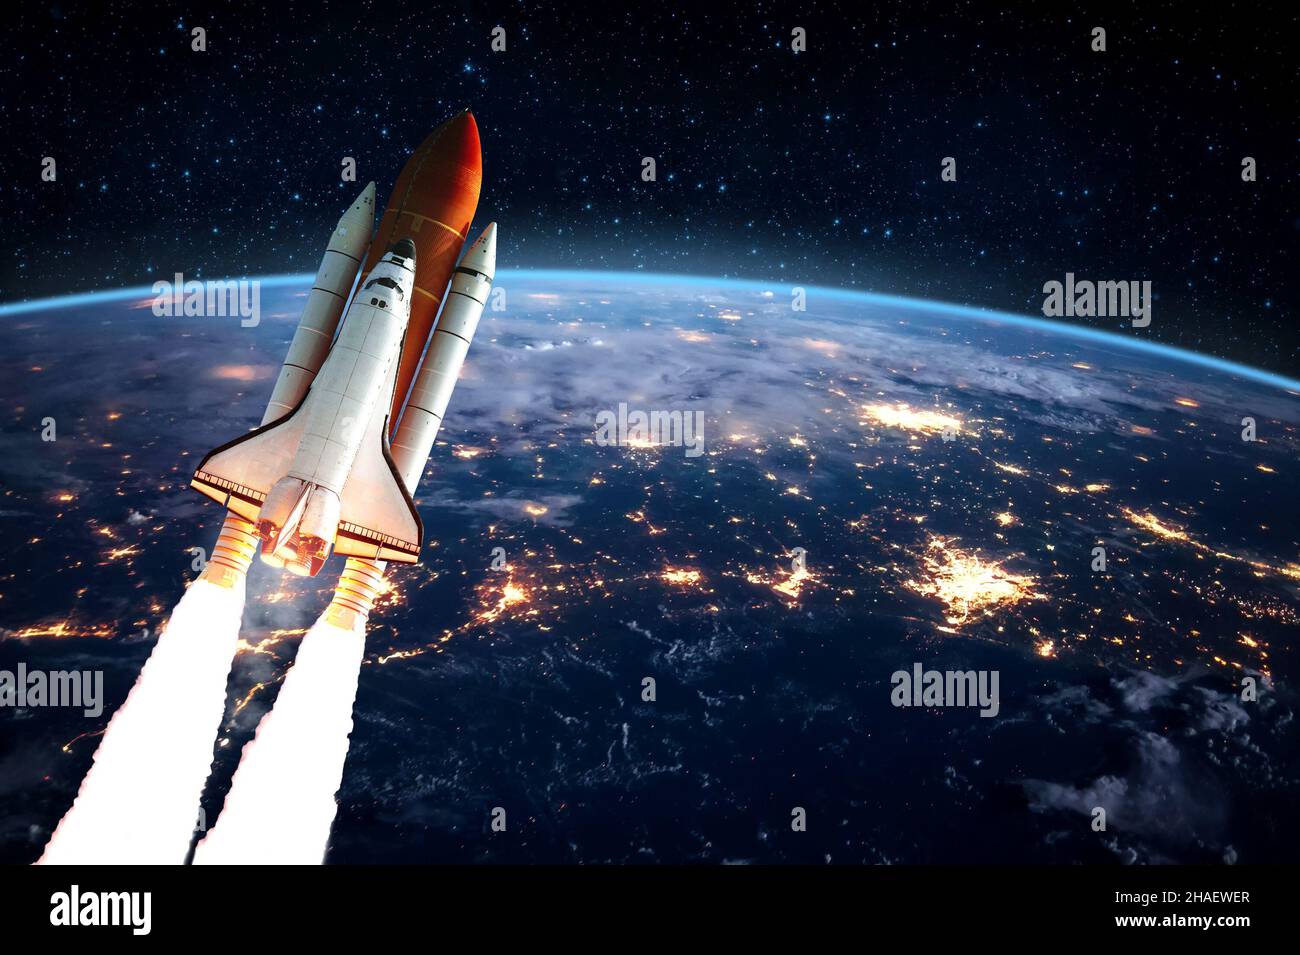 Spaceship on mission in the universe. Exploration Discovery background copy space. Element of image by NASA. Stock Photo